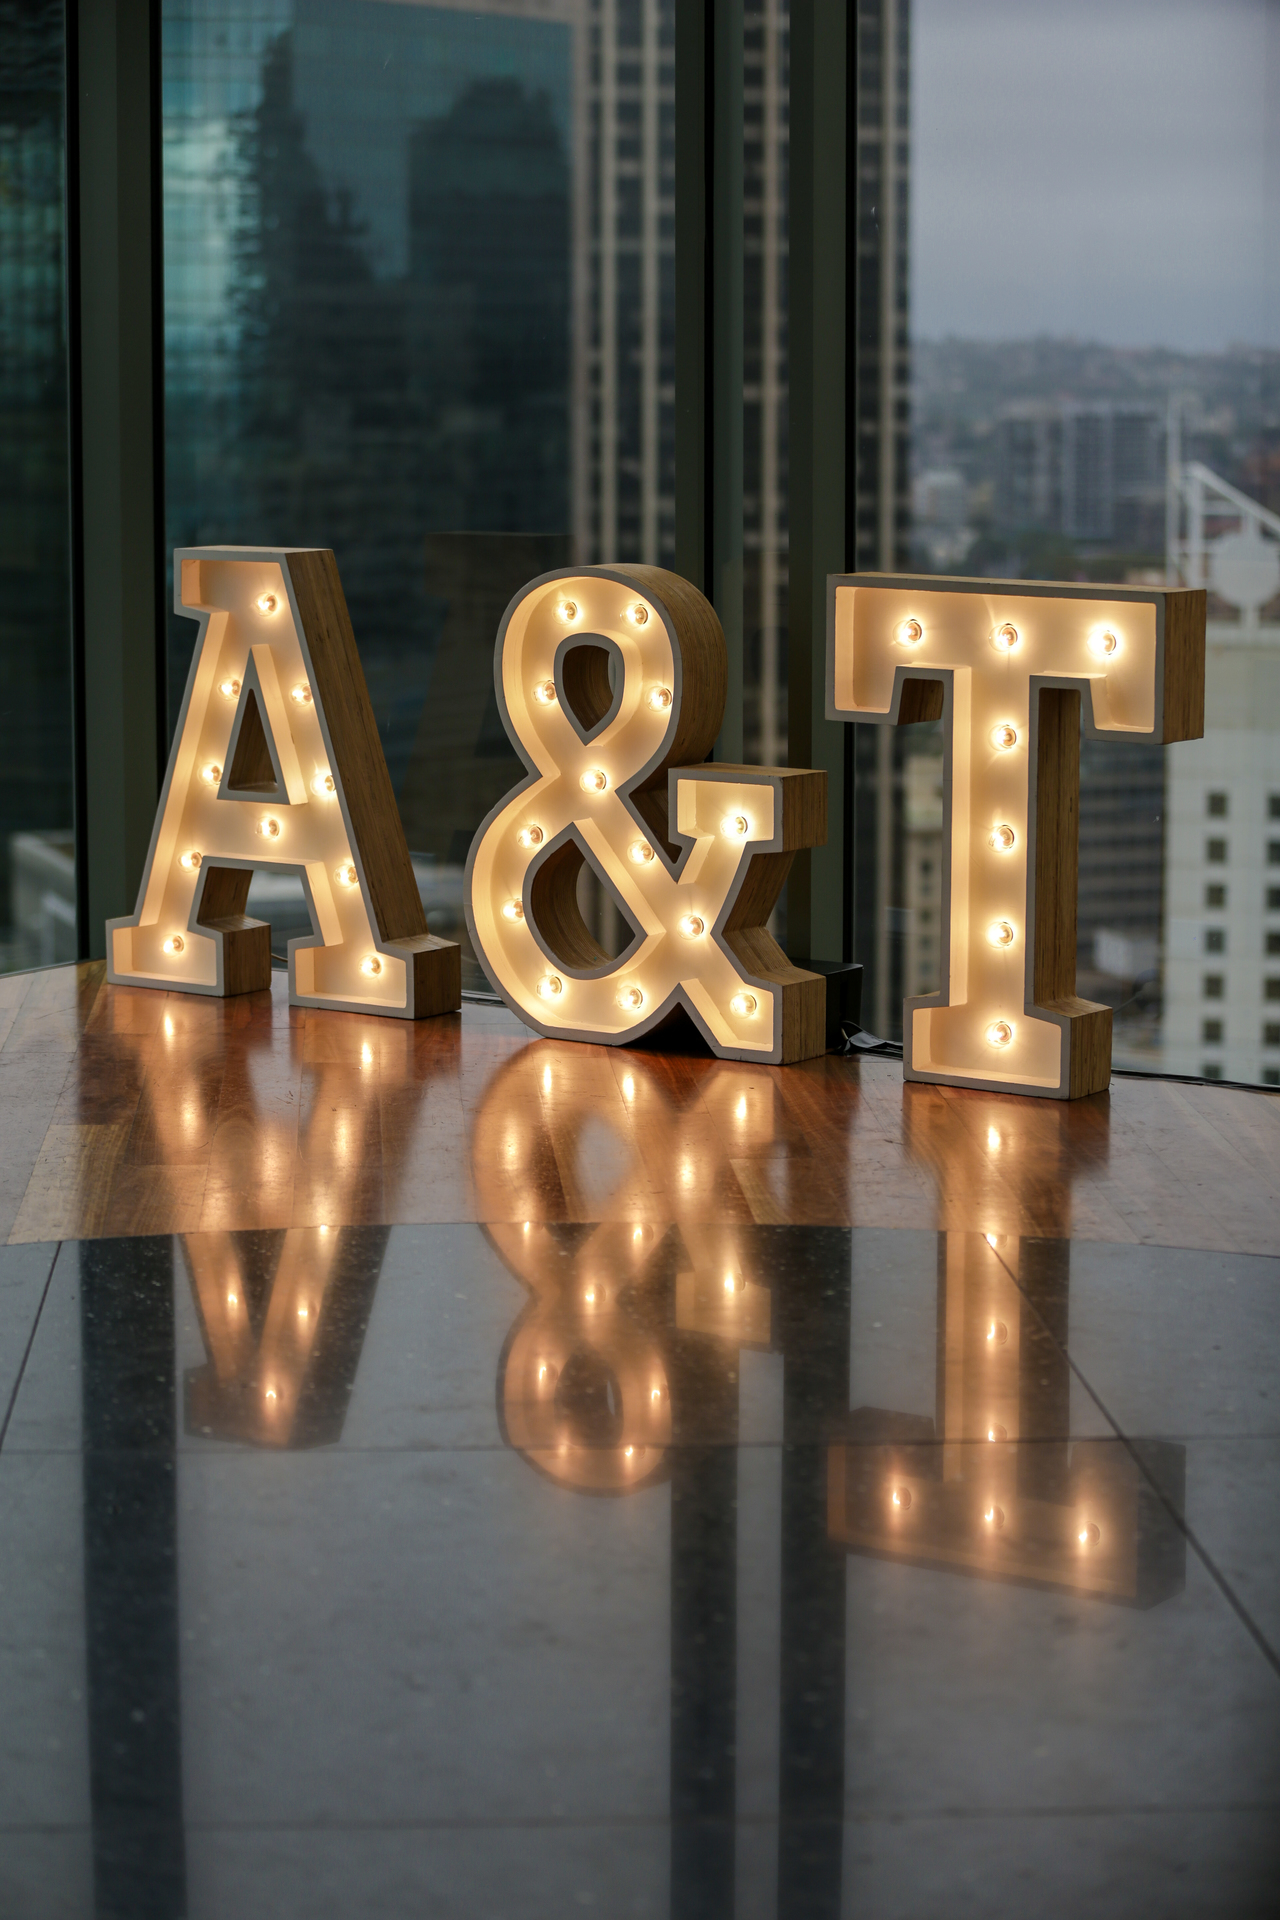 Giant wedding letters with lights 'A & T'